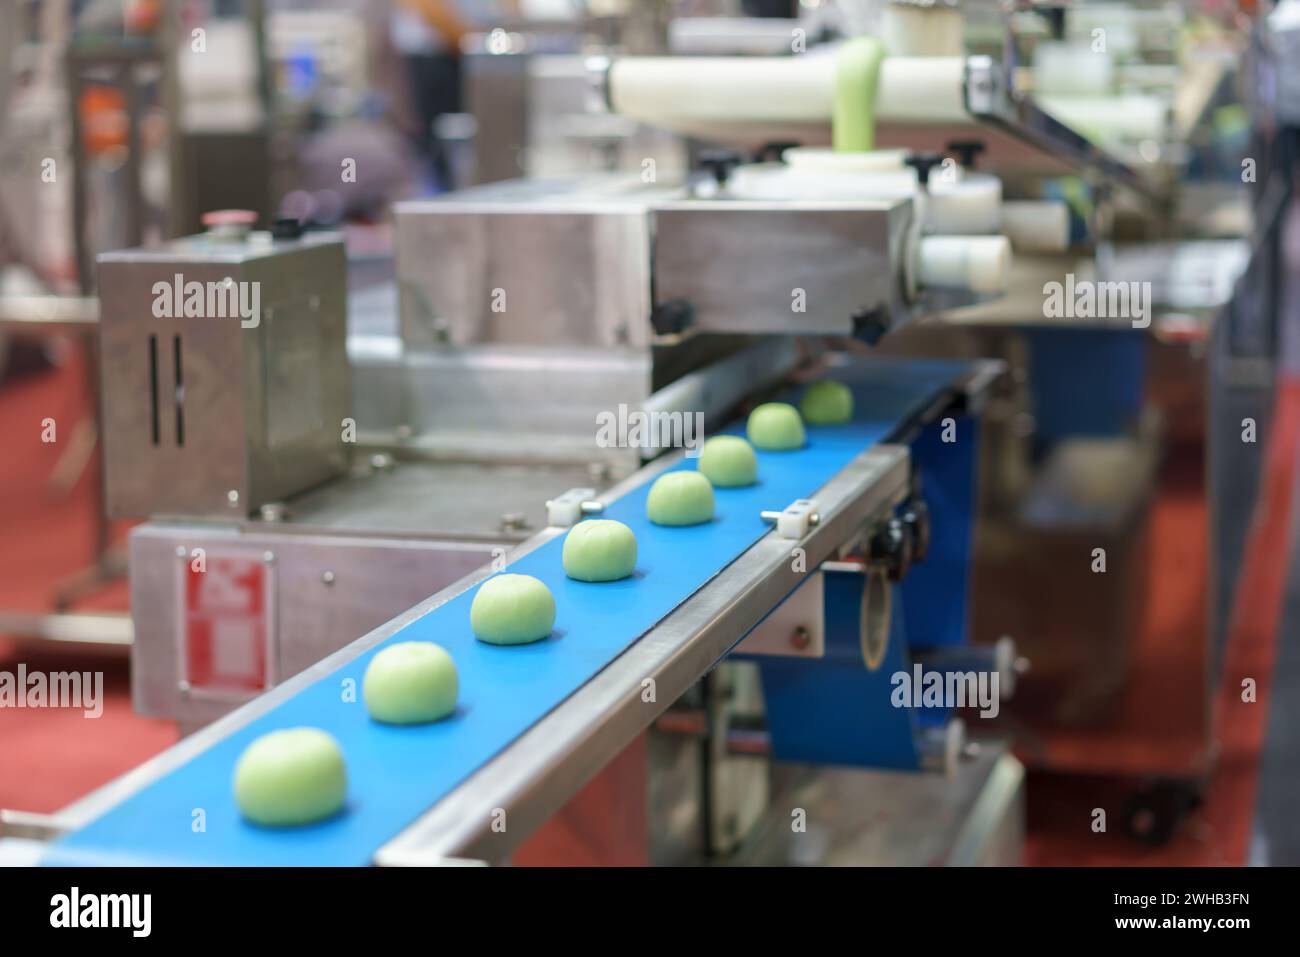 Close-up image of an automated industrial food processing system showing dough portions on a blue conveyor belt, with machinery elements in the backgr Stock Photo